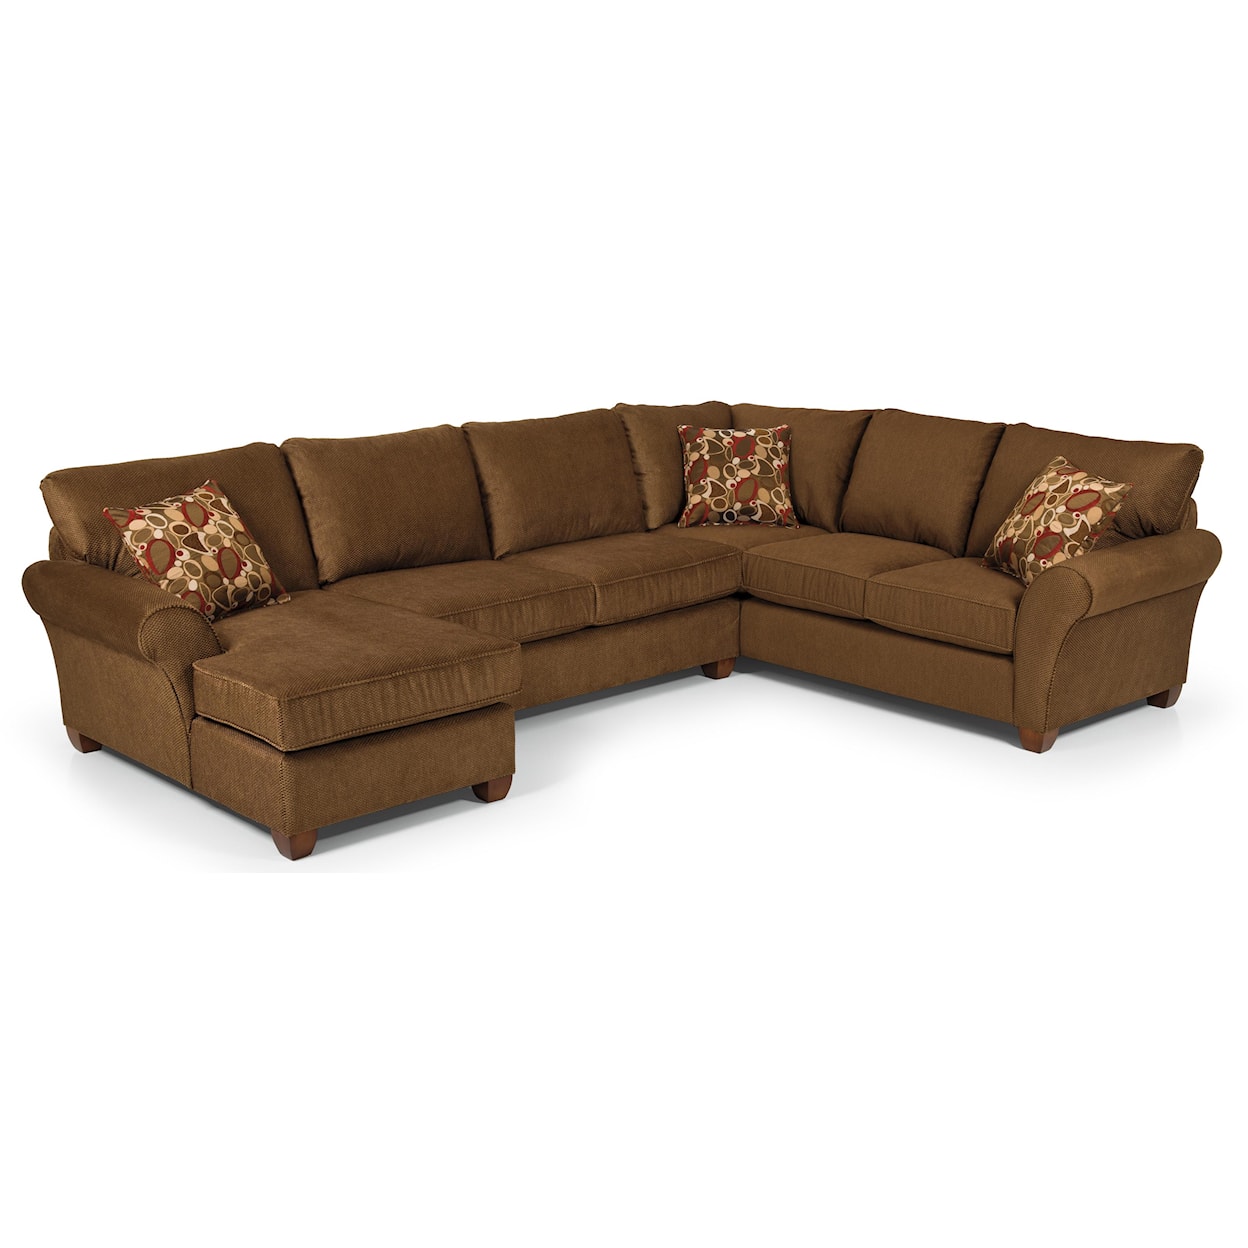 Sunset Home 320 Transitional Sectional Sofa